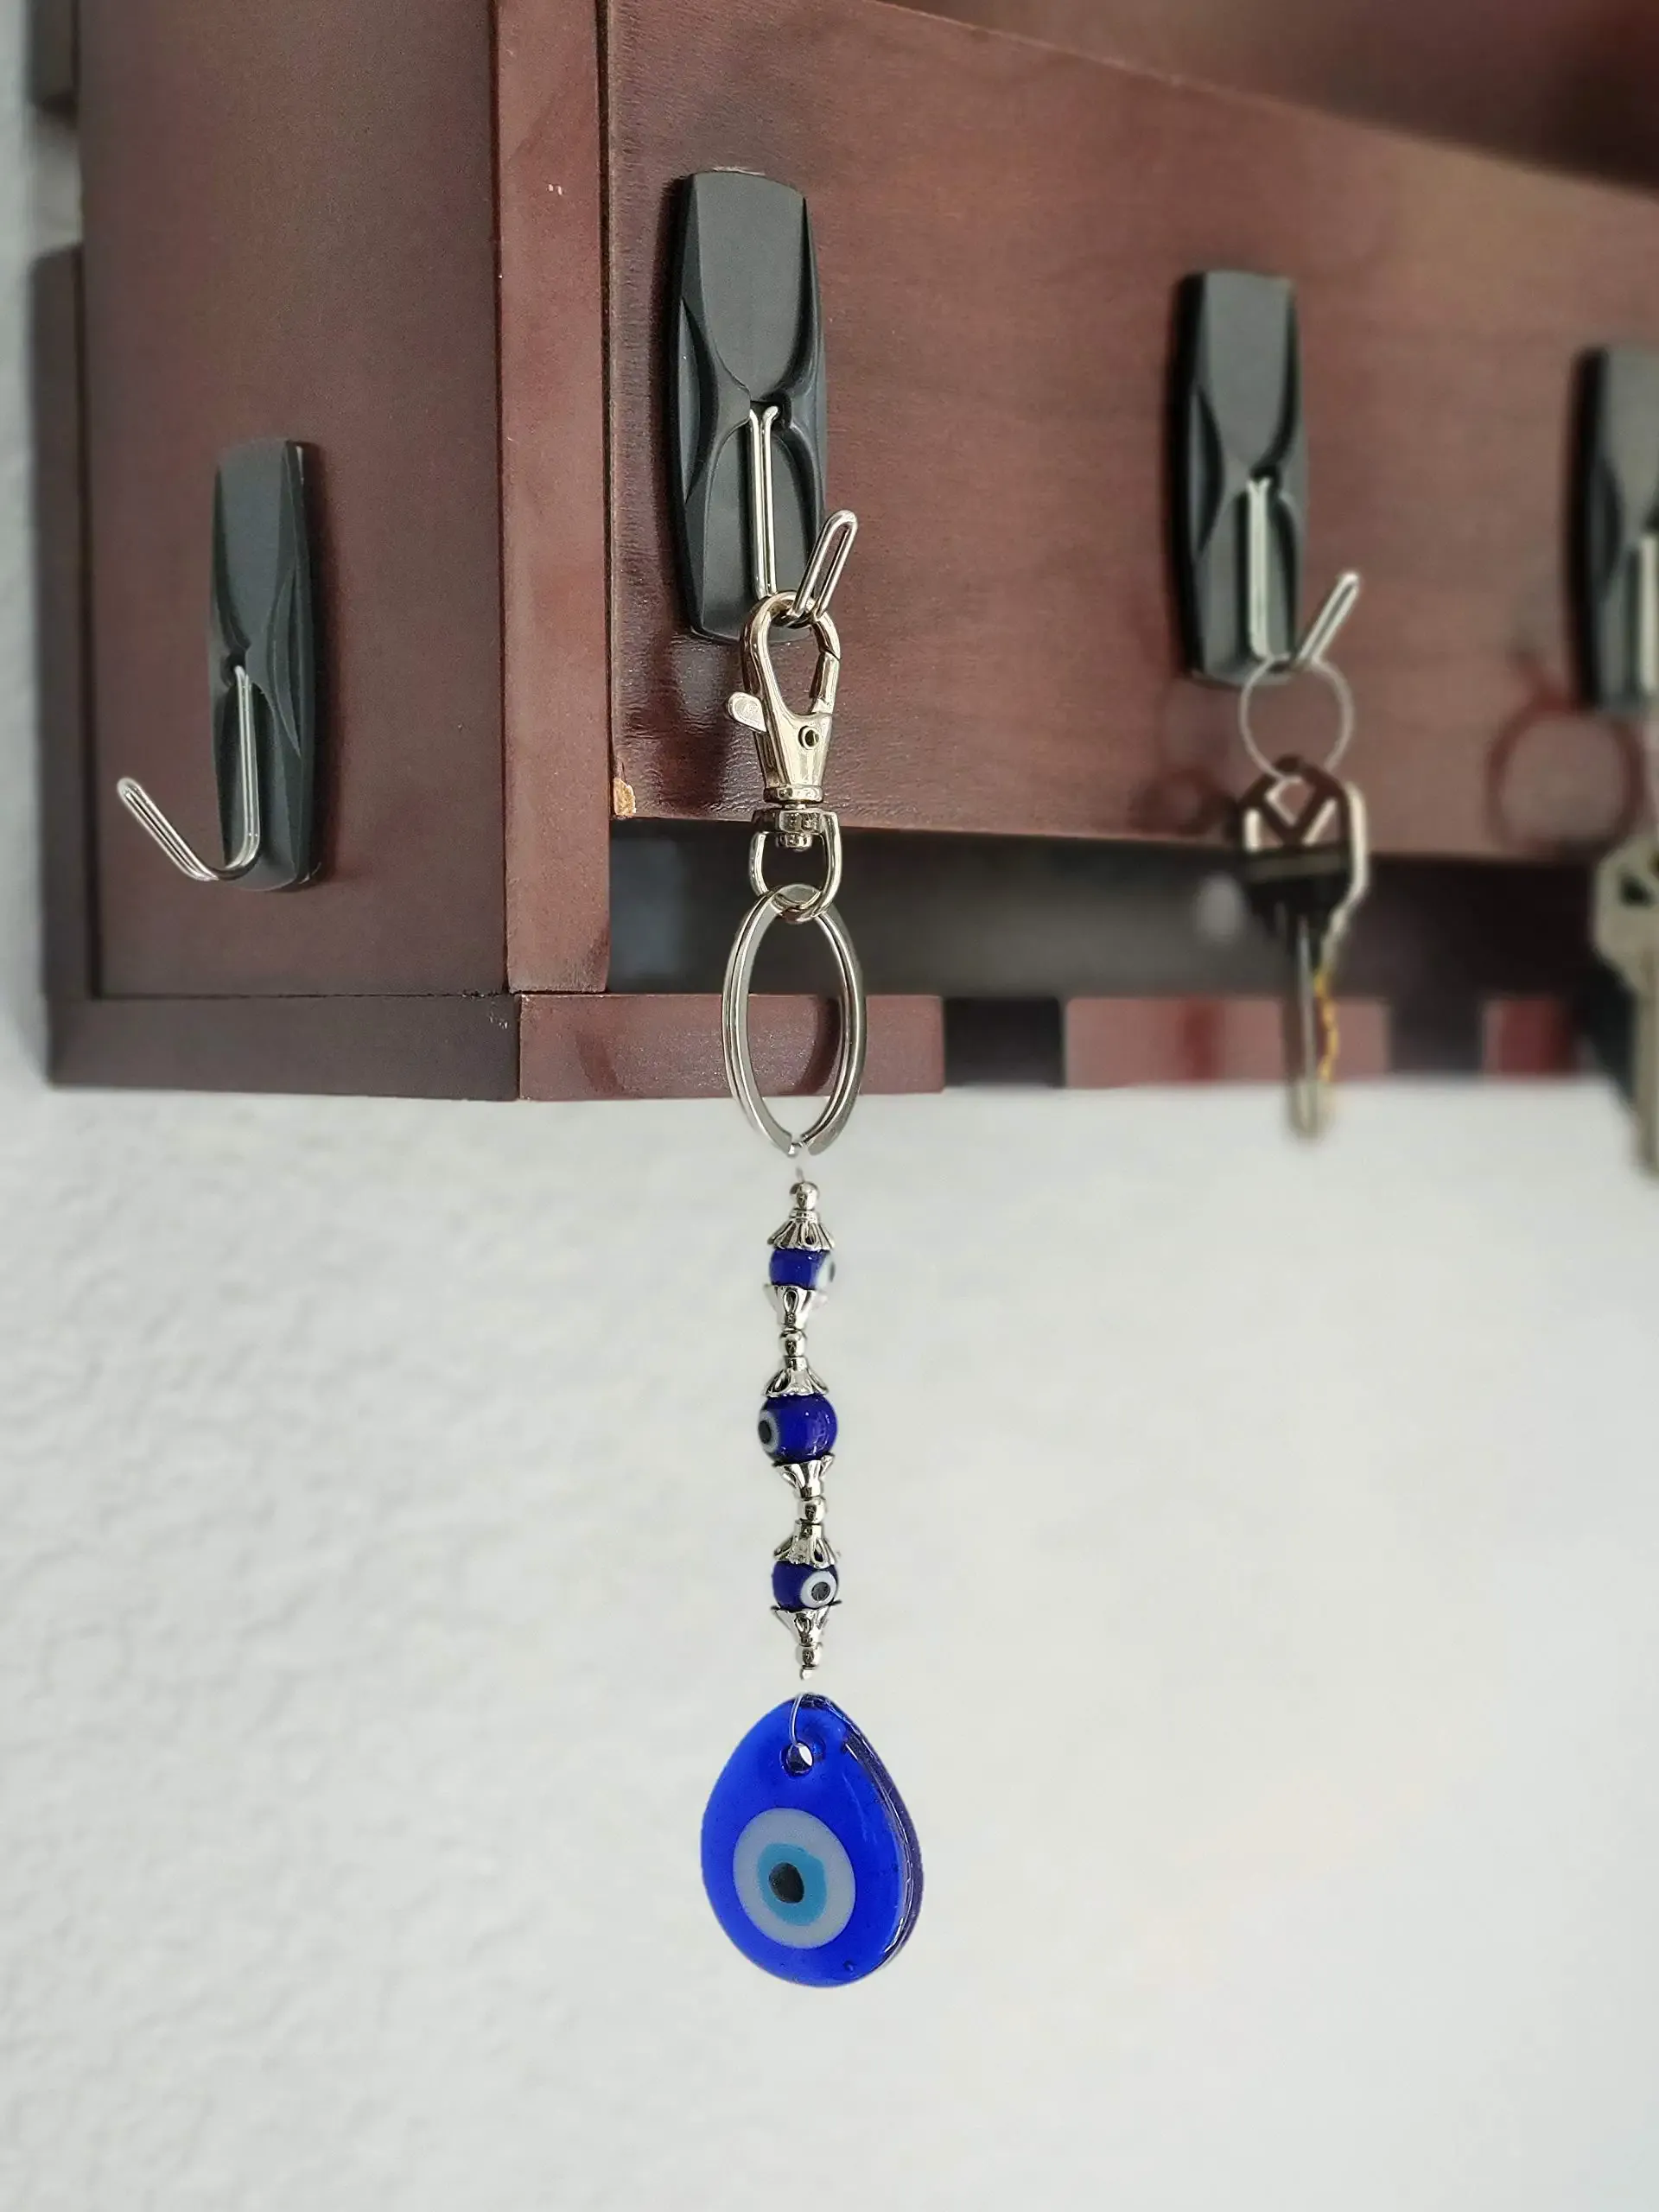 3ml lucky blue glass evil eye keychain ring w/ 3 bead evil eyes sign of good luck and protection home keys purse bags and rear view mirror hanging accessories gift for men women